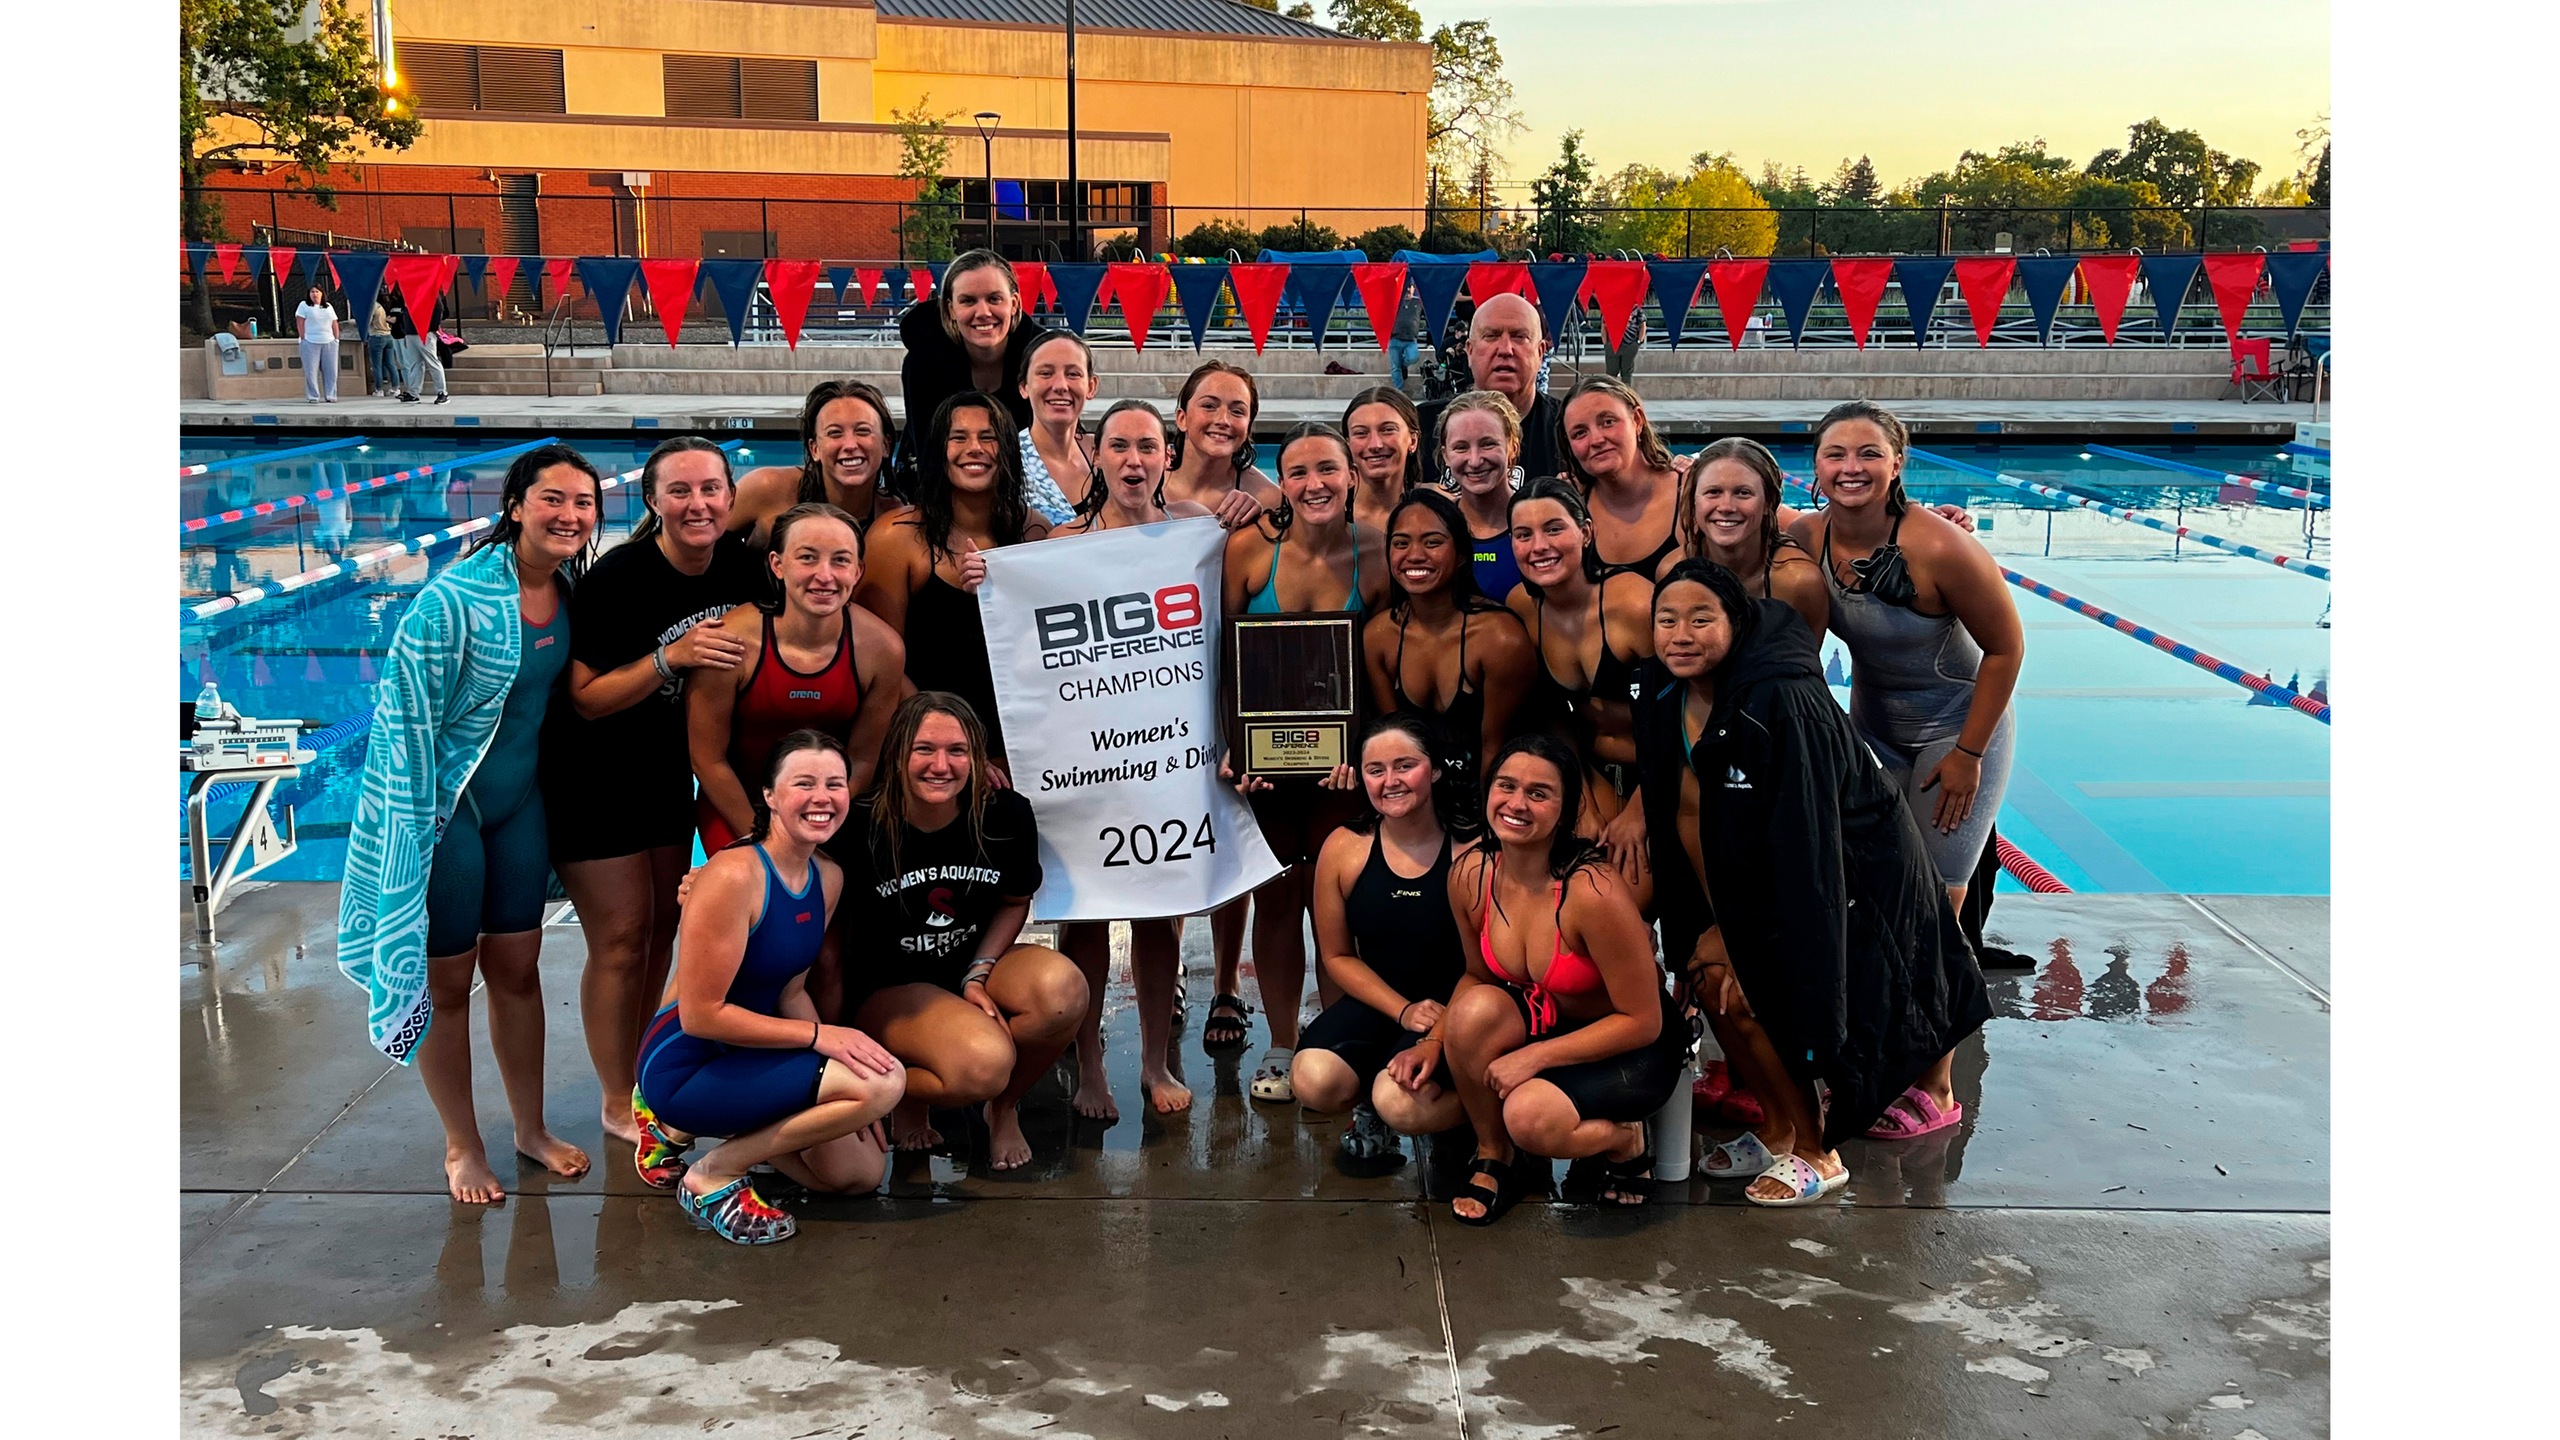 Women's swim dive pose with 2024 Big 8 championship banner and trophy in front of pool.